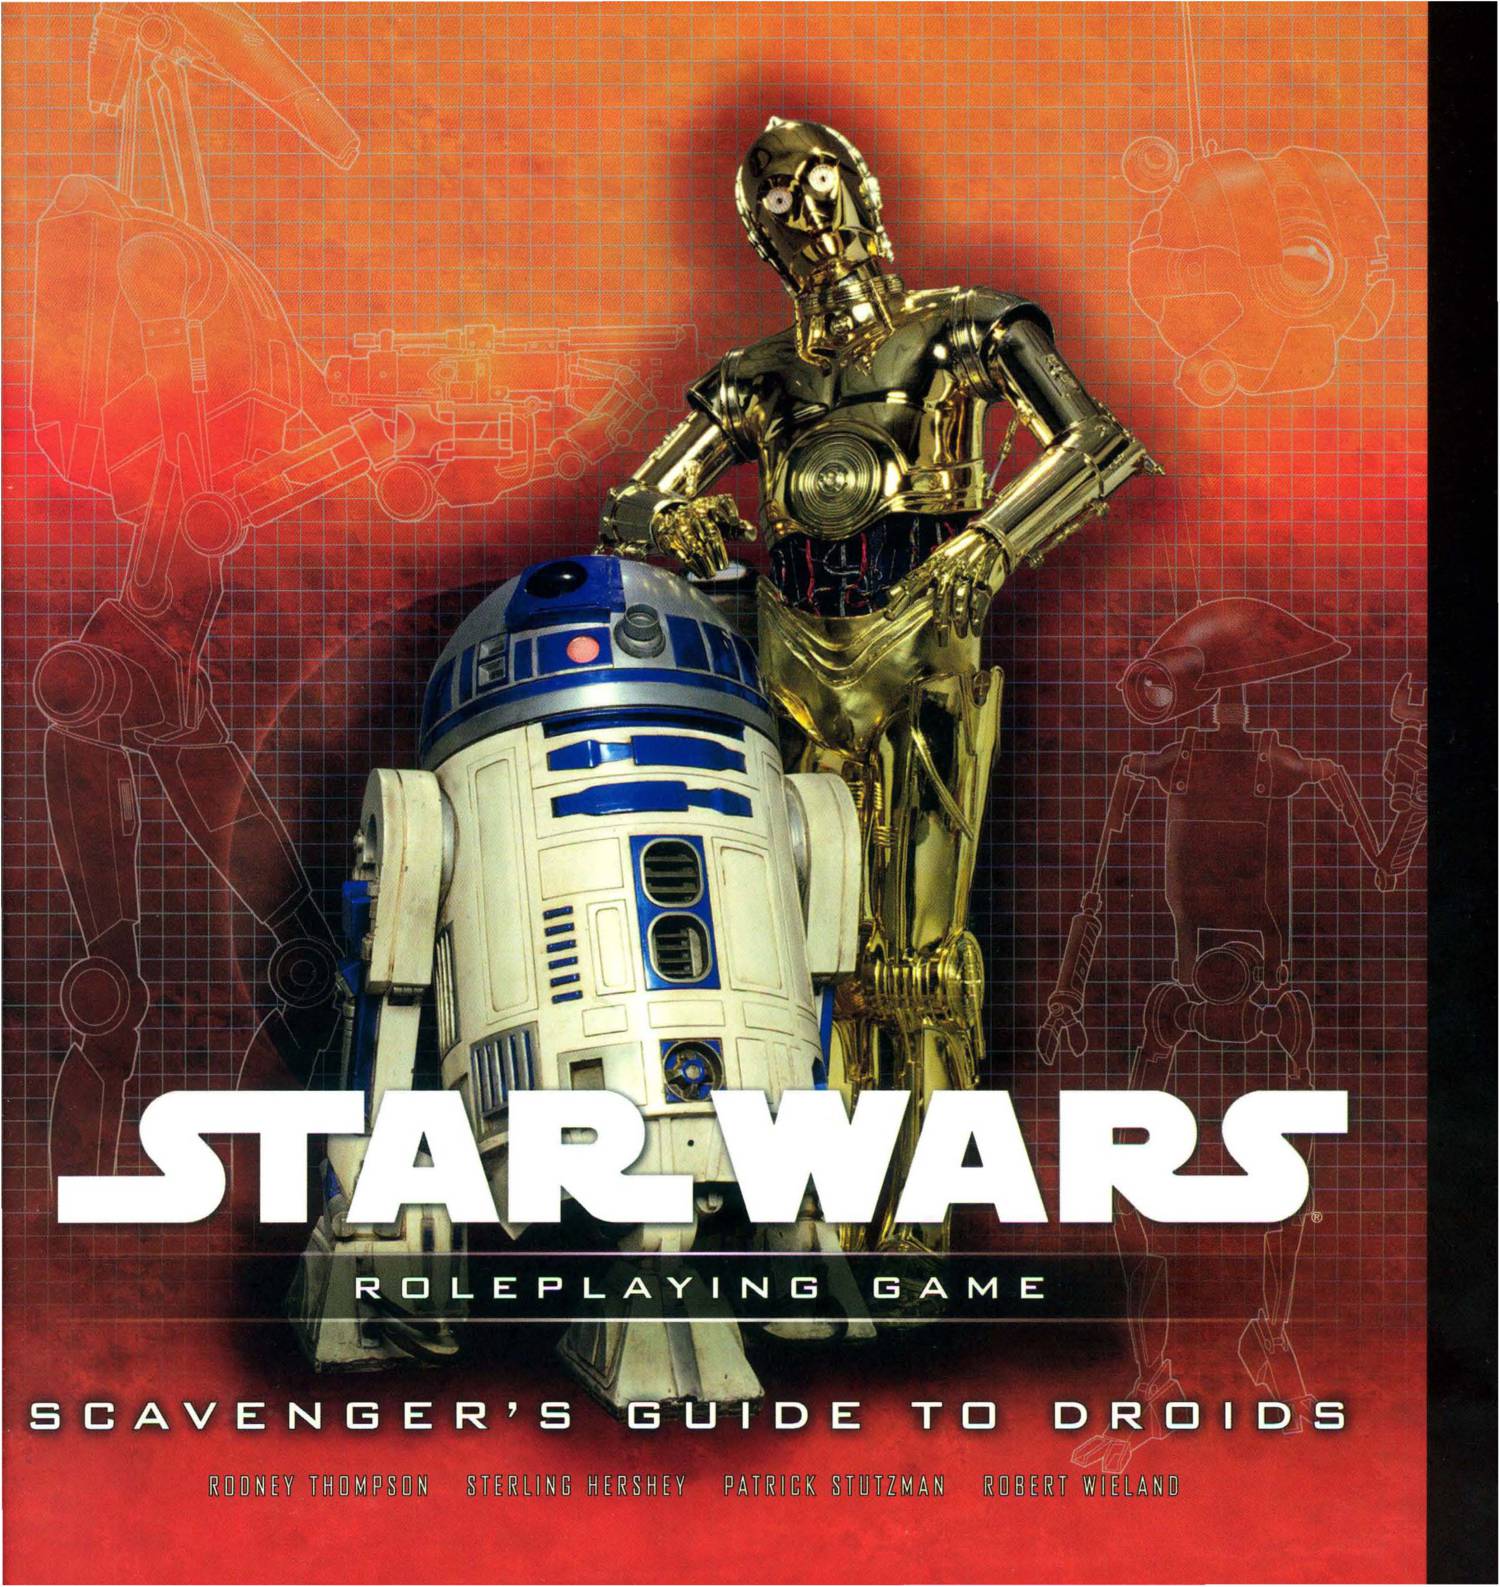 Star Wars Saga Edition - Scavenger's Guide to Droids.pdf | DocDroid